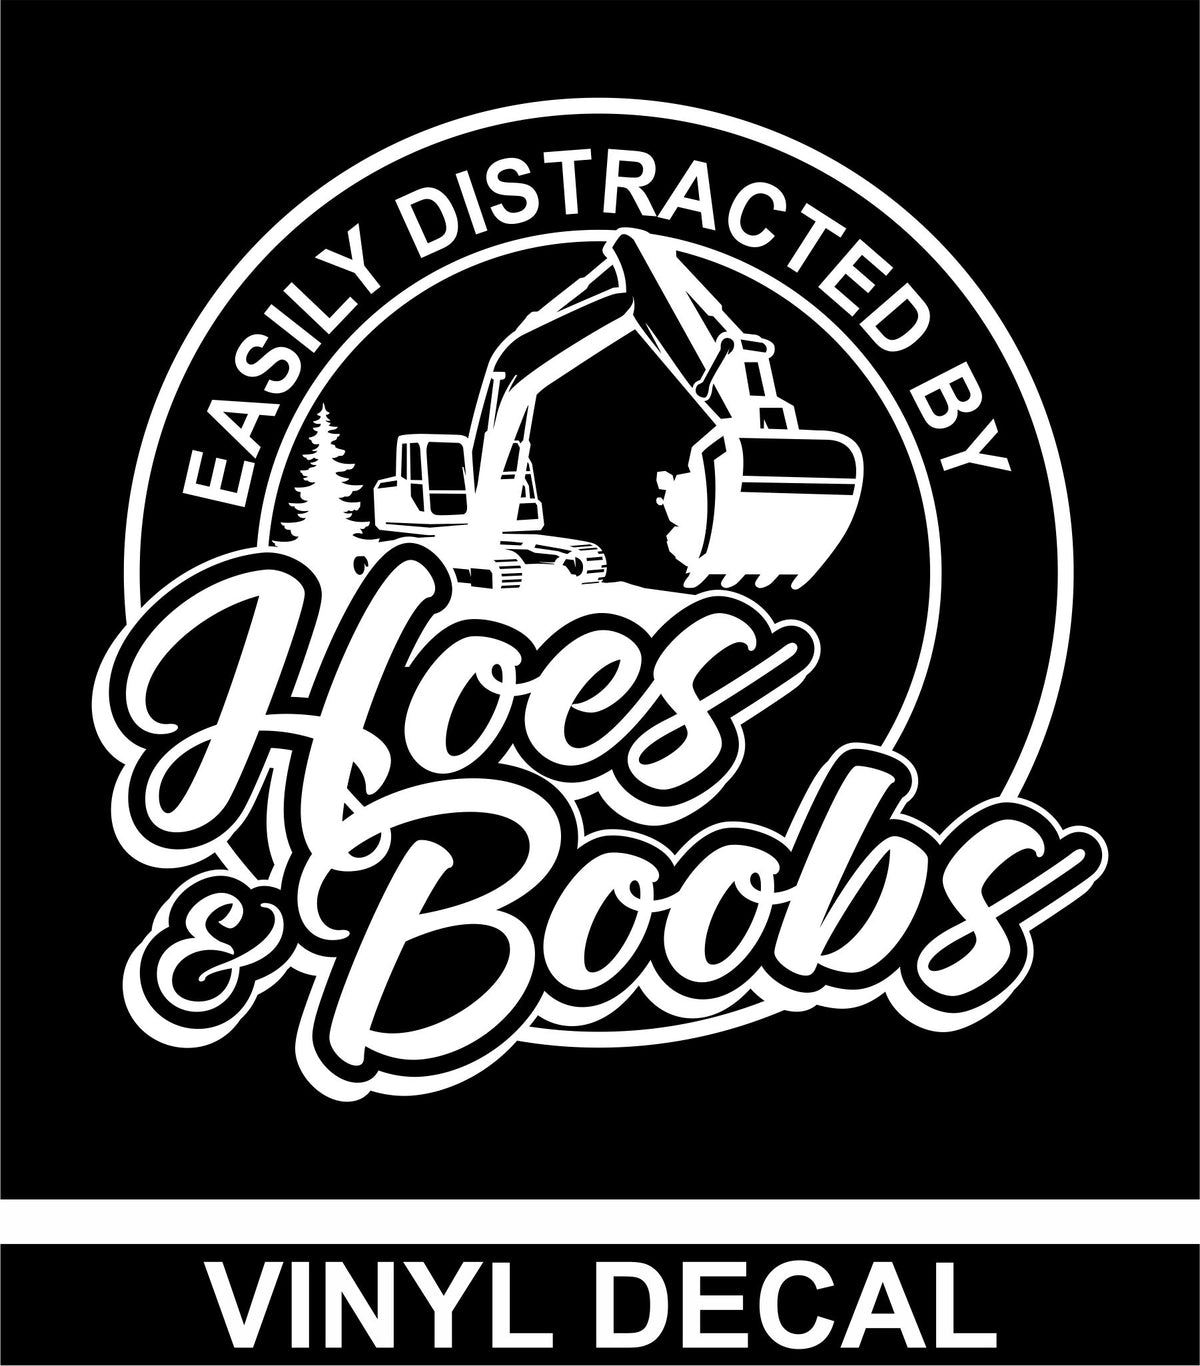 Easily Distracted by Hoes & Boobs - Excavator - Vinyl Decal - Free Shipping